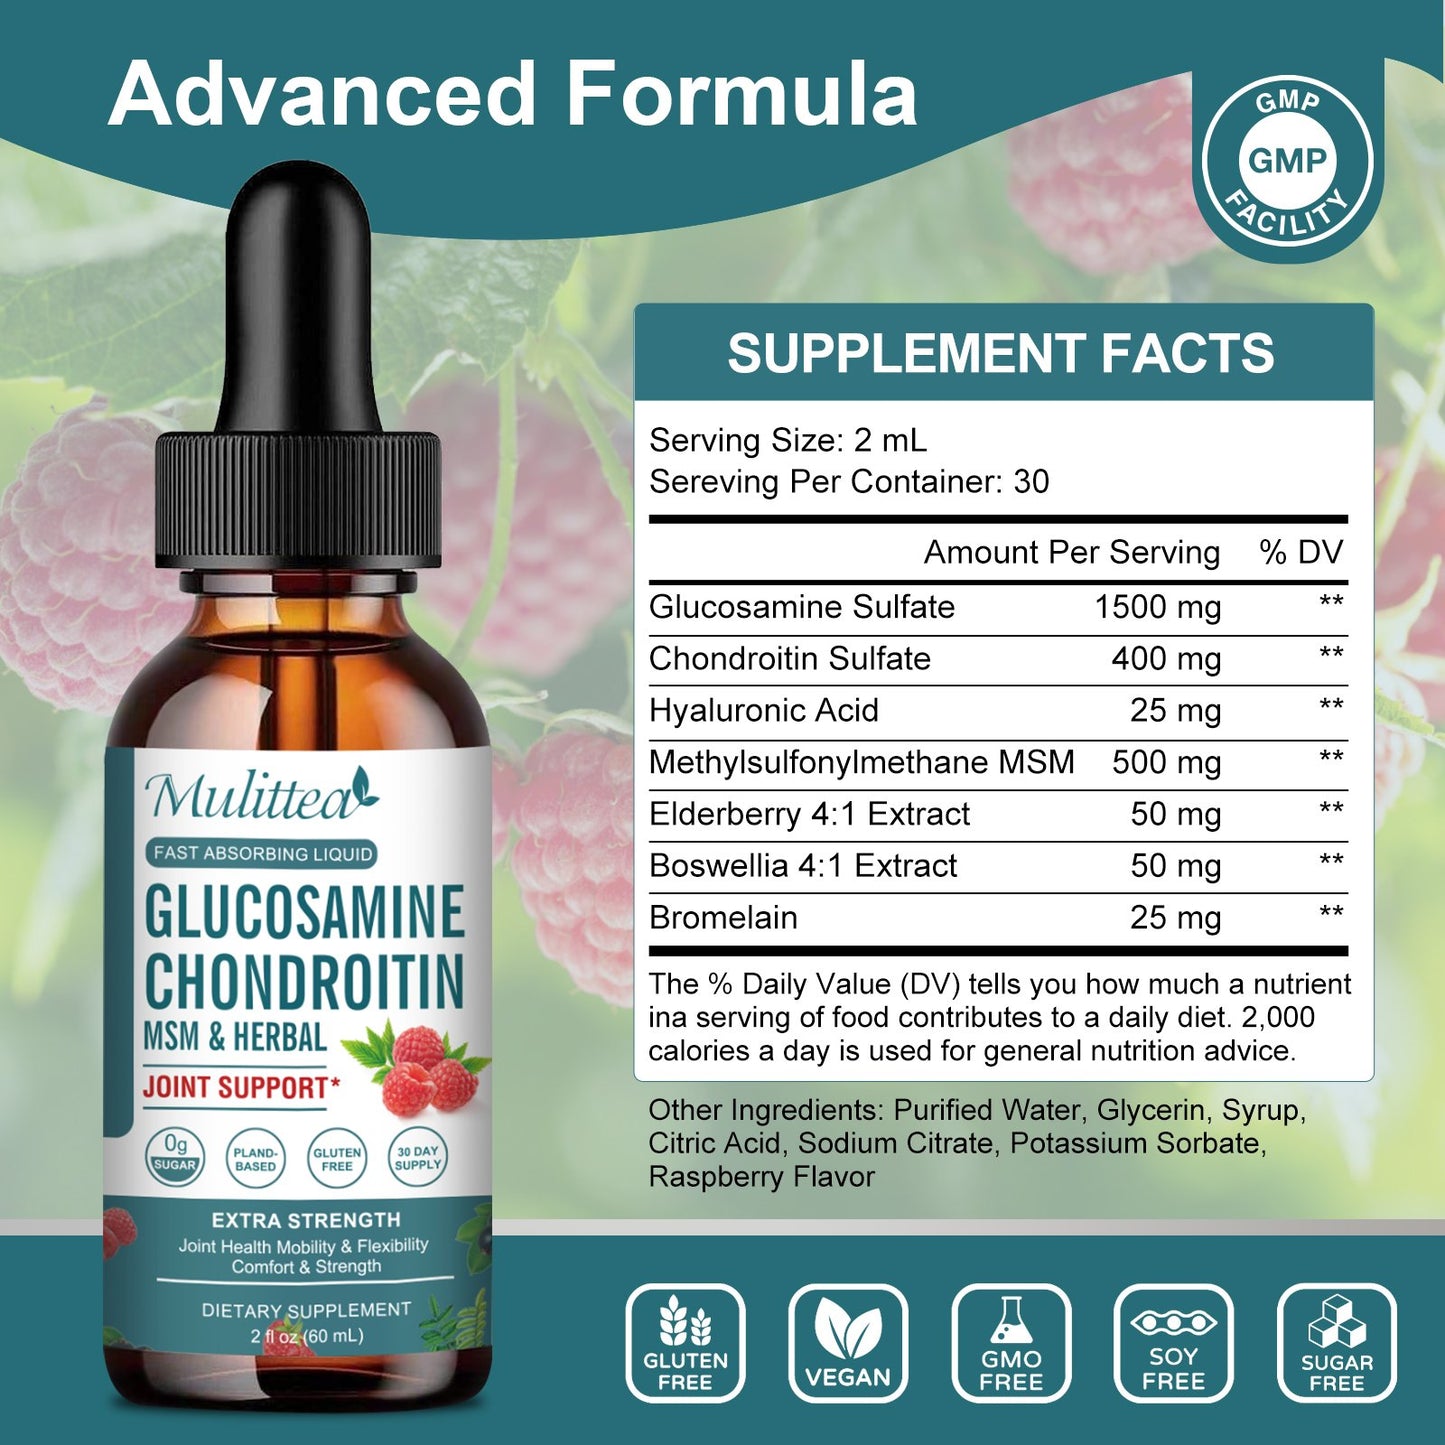 Glucosamine Chondroitin MSM Liquid Drops, Extra Strength Joint Support Supplement with Elderberry, Boswelia, Bromelain, Hyaluronic Acid, Antioxidant Immune Support for Adults, Men & Women(2 Fl oz)